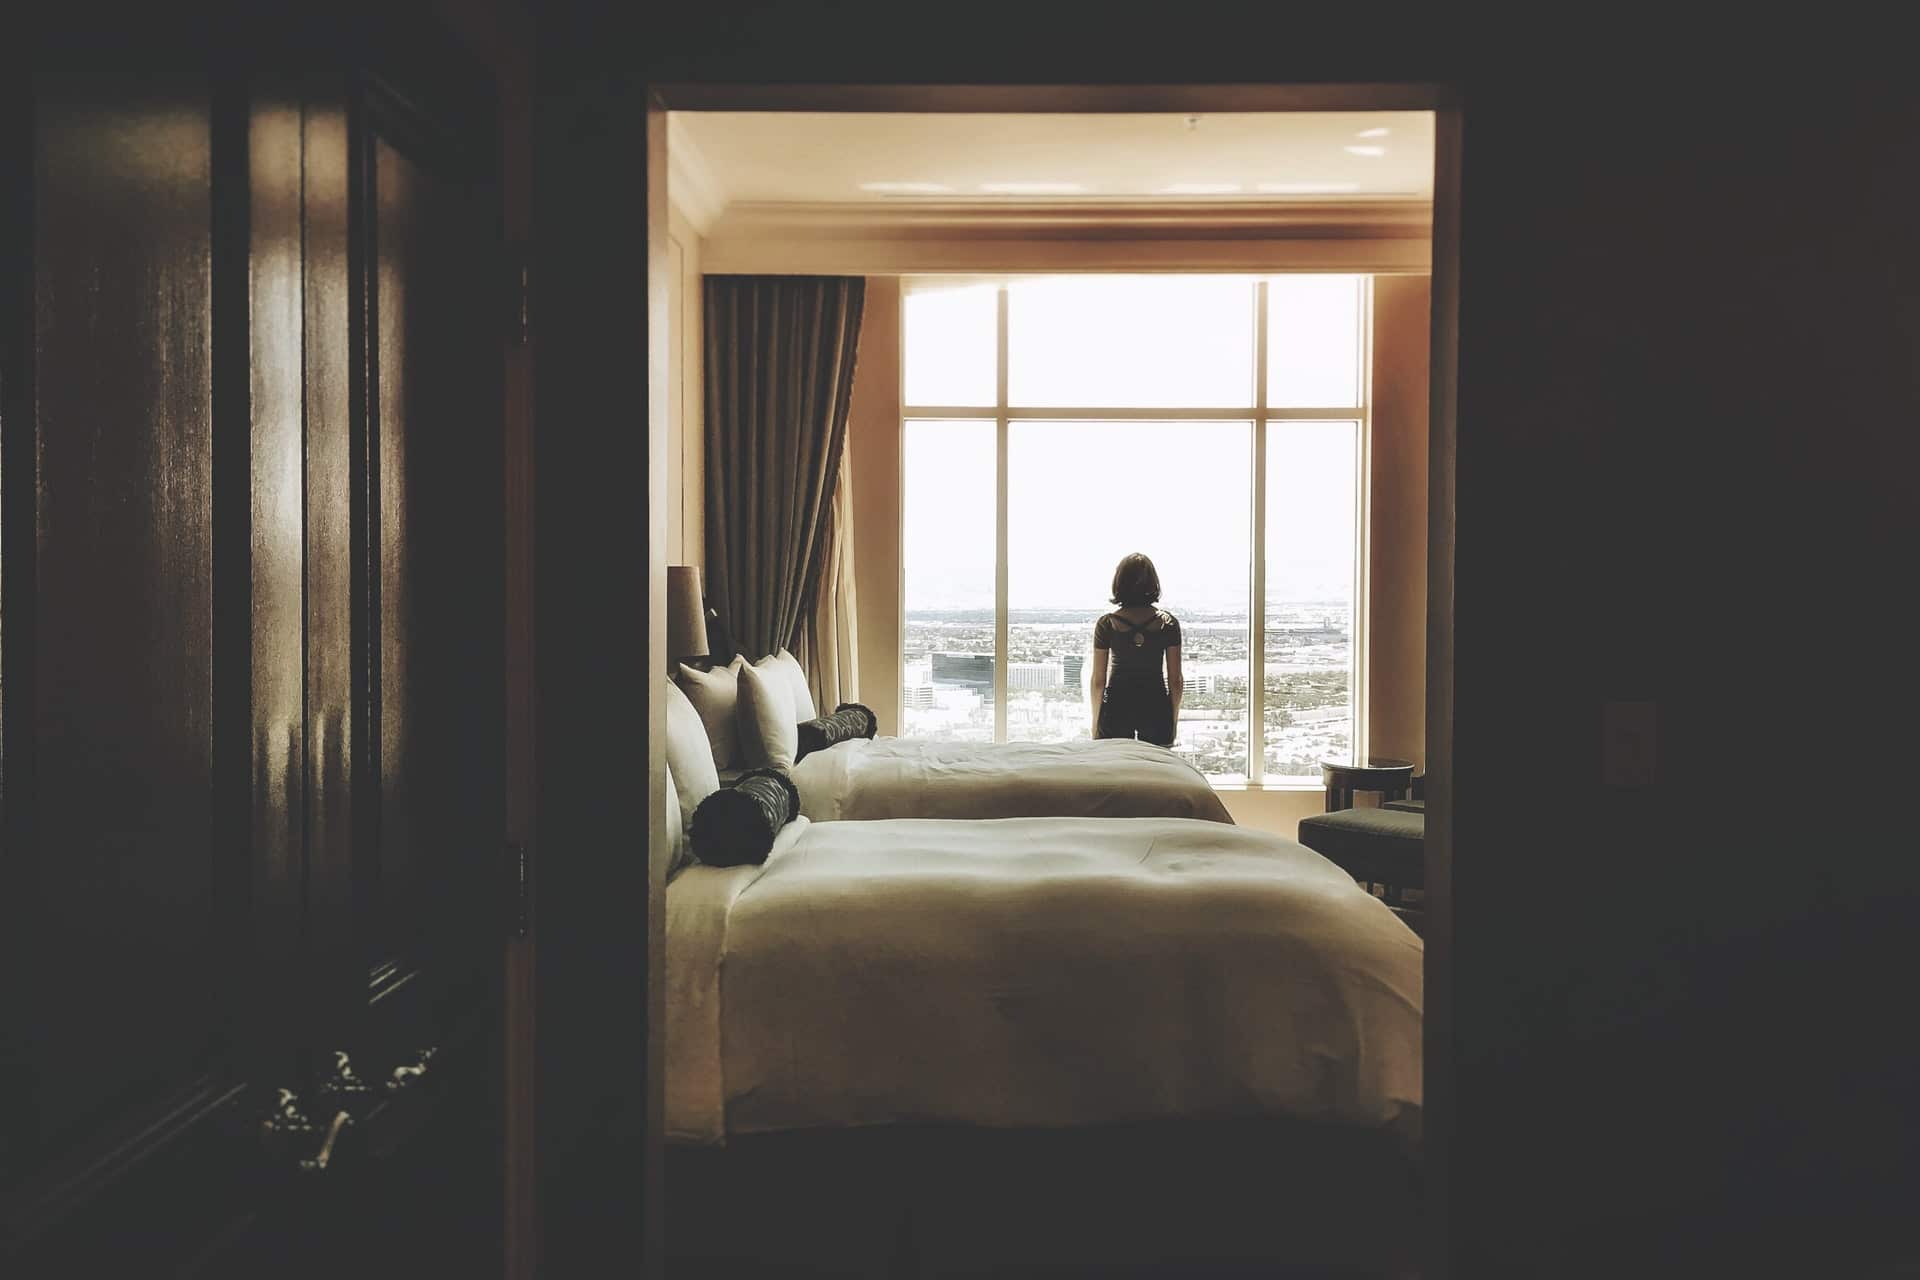 Woman at hotel window representing recommendations that Canada end hotel quarantine